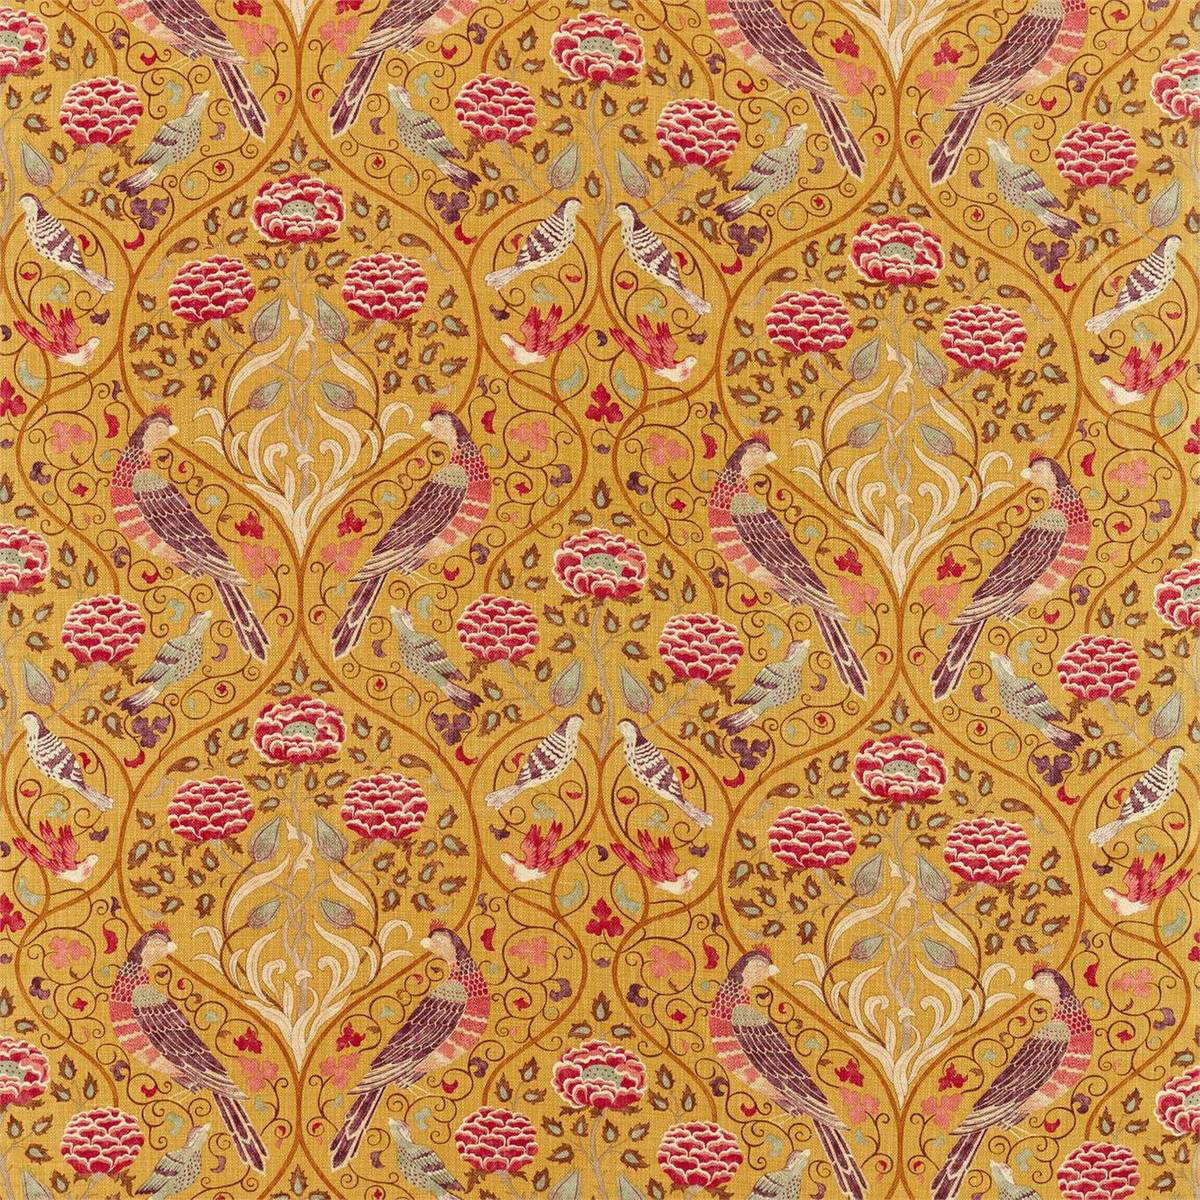 Seasons By May Saffron Fabric by William Morris & Co.